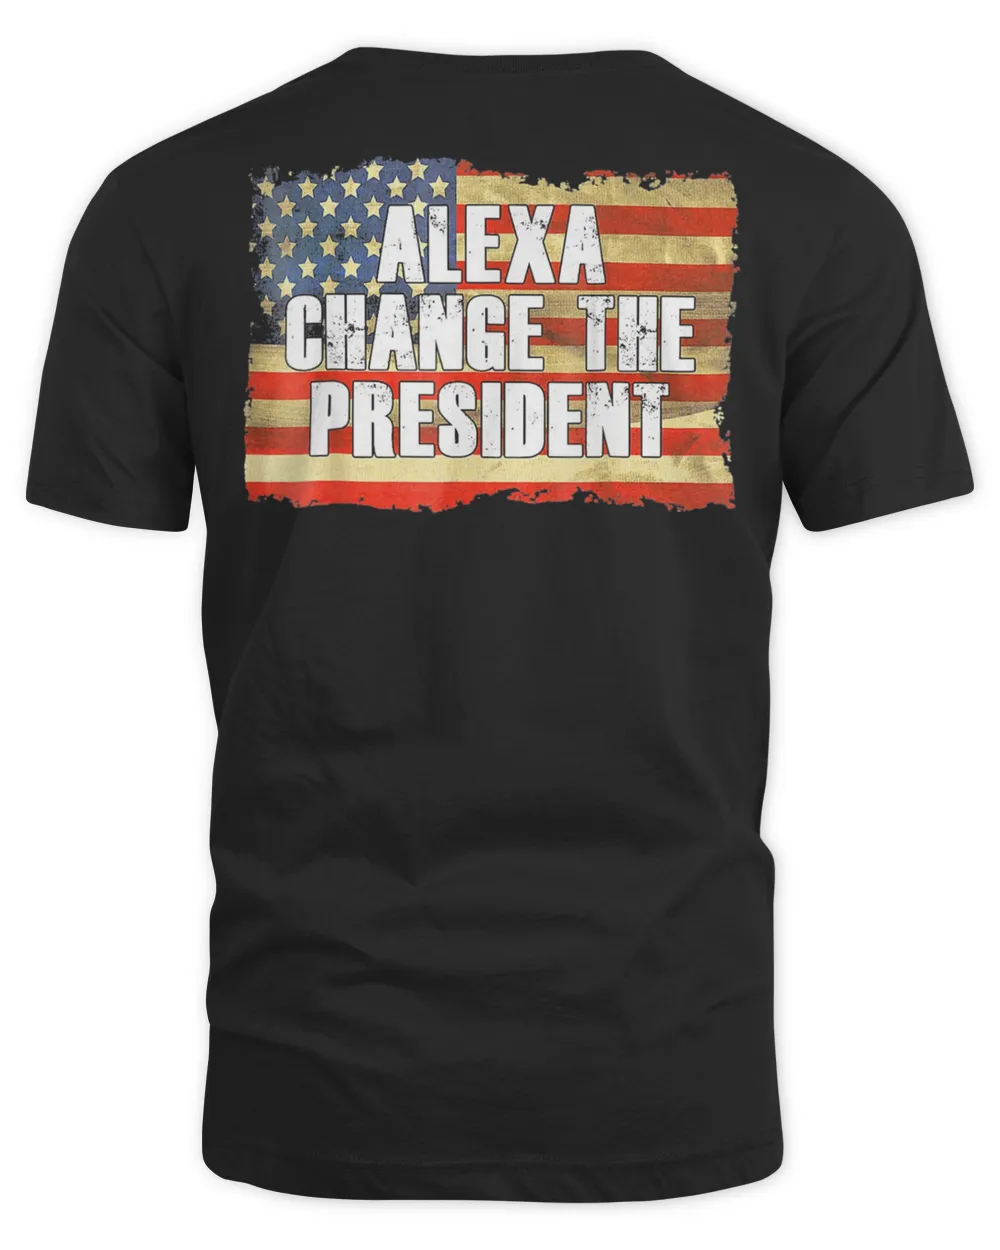 Alexa Change The President Anti and Replace Biden By Trump T-Shirt